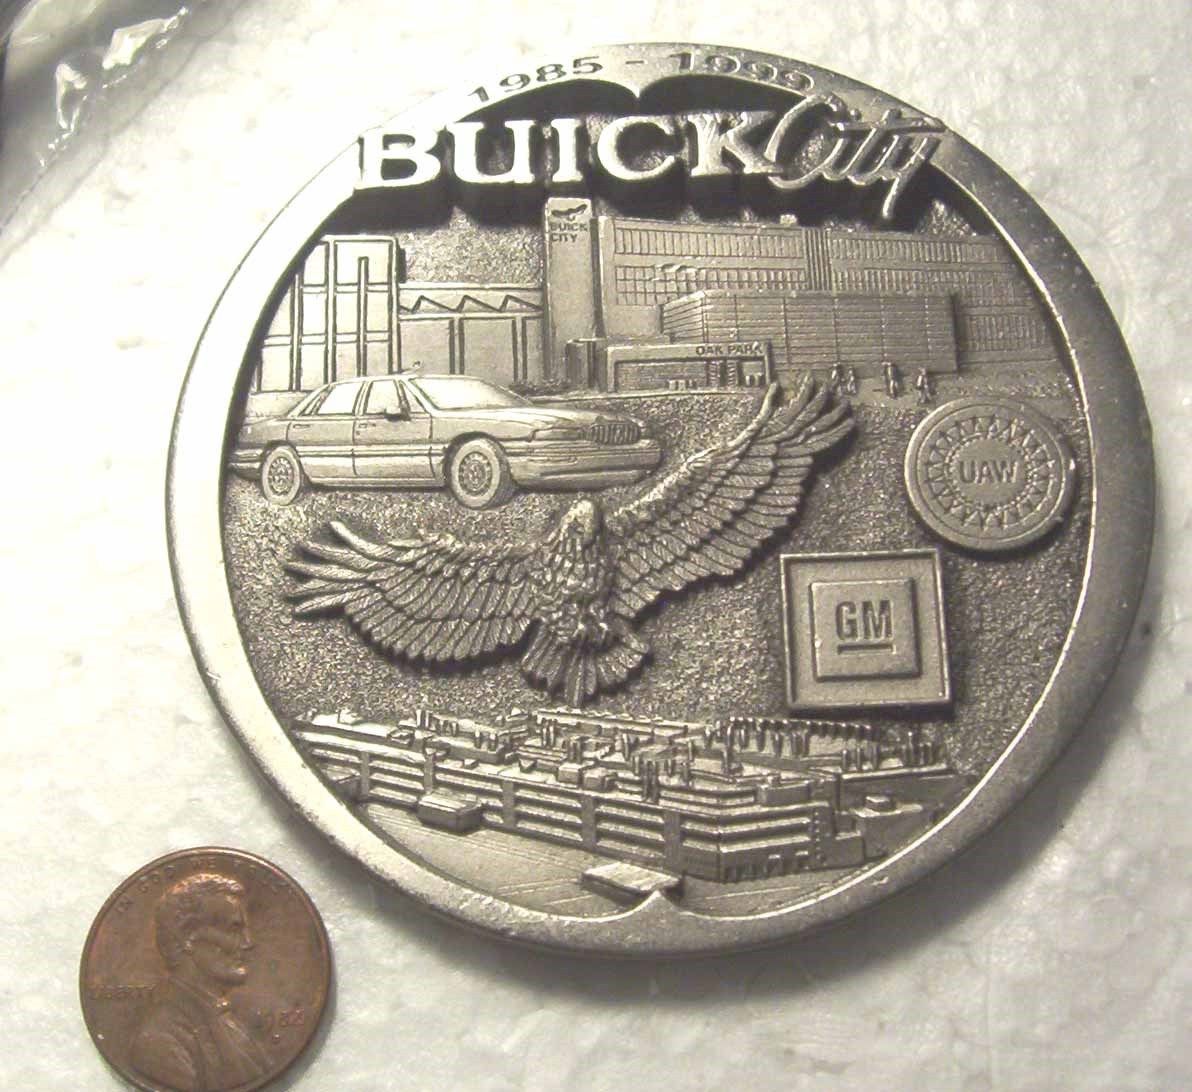 Buick Coins / Tokens / Medallions / Badges